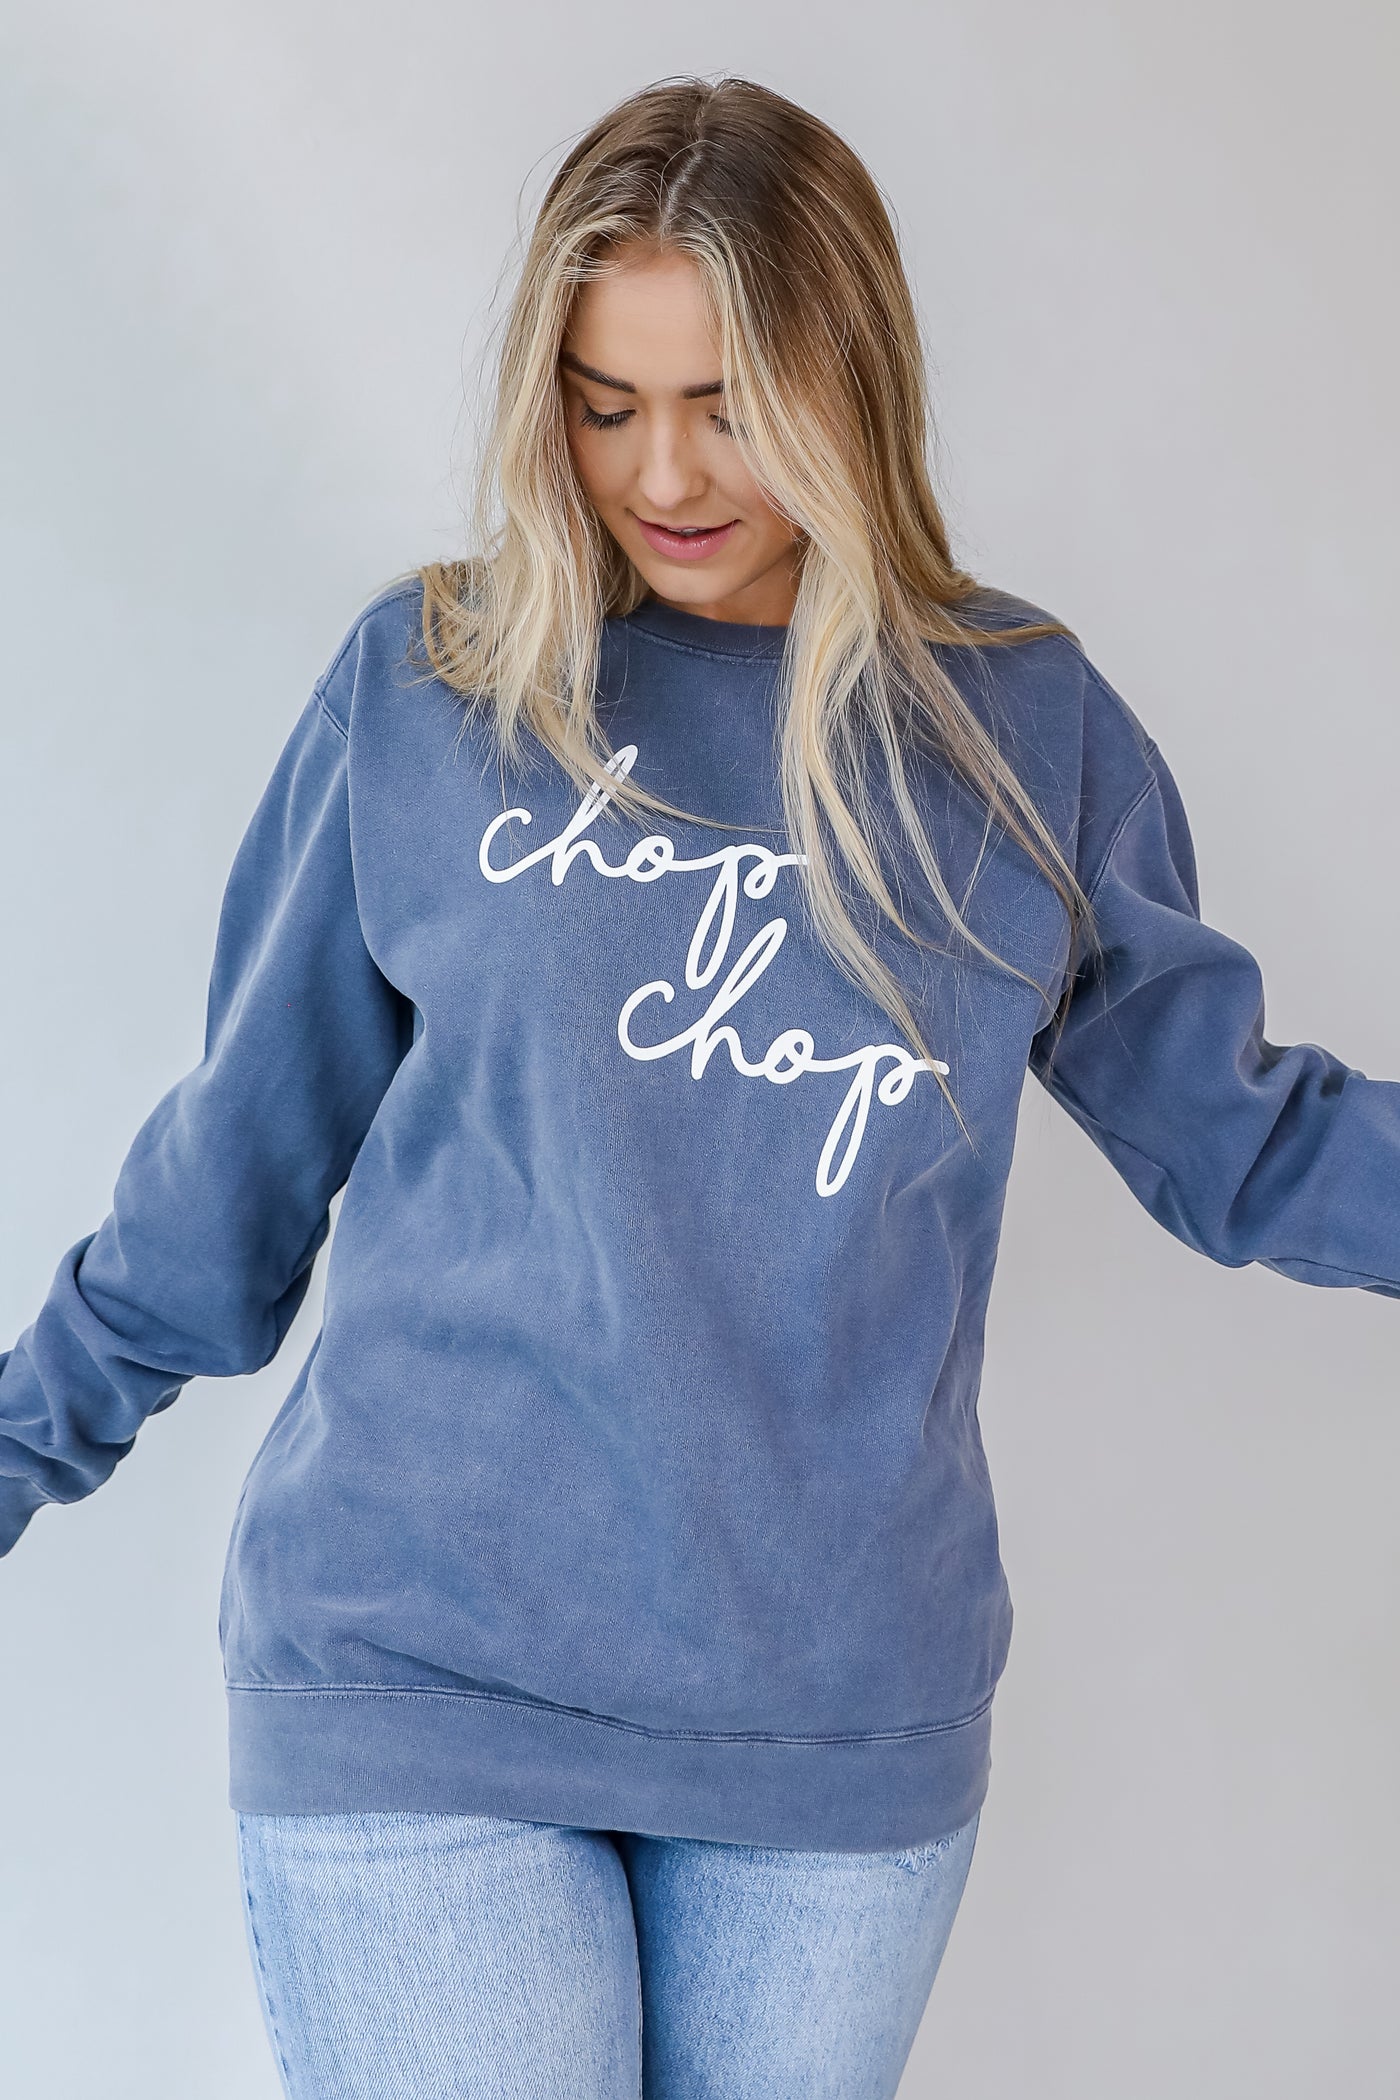 Chop Chop Script Pullover in navy front view